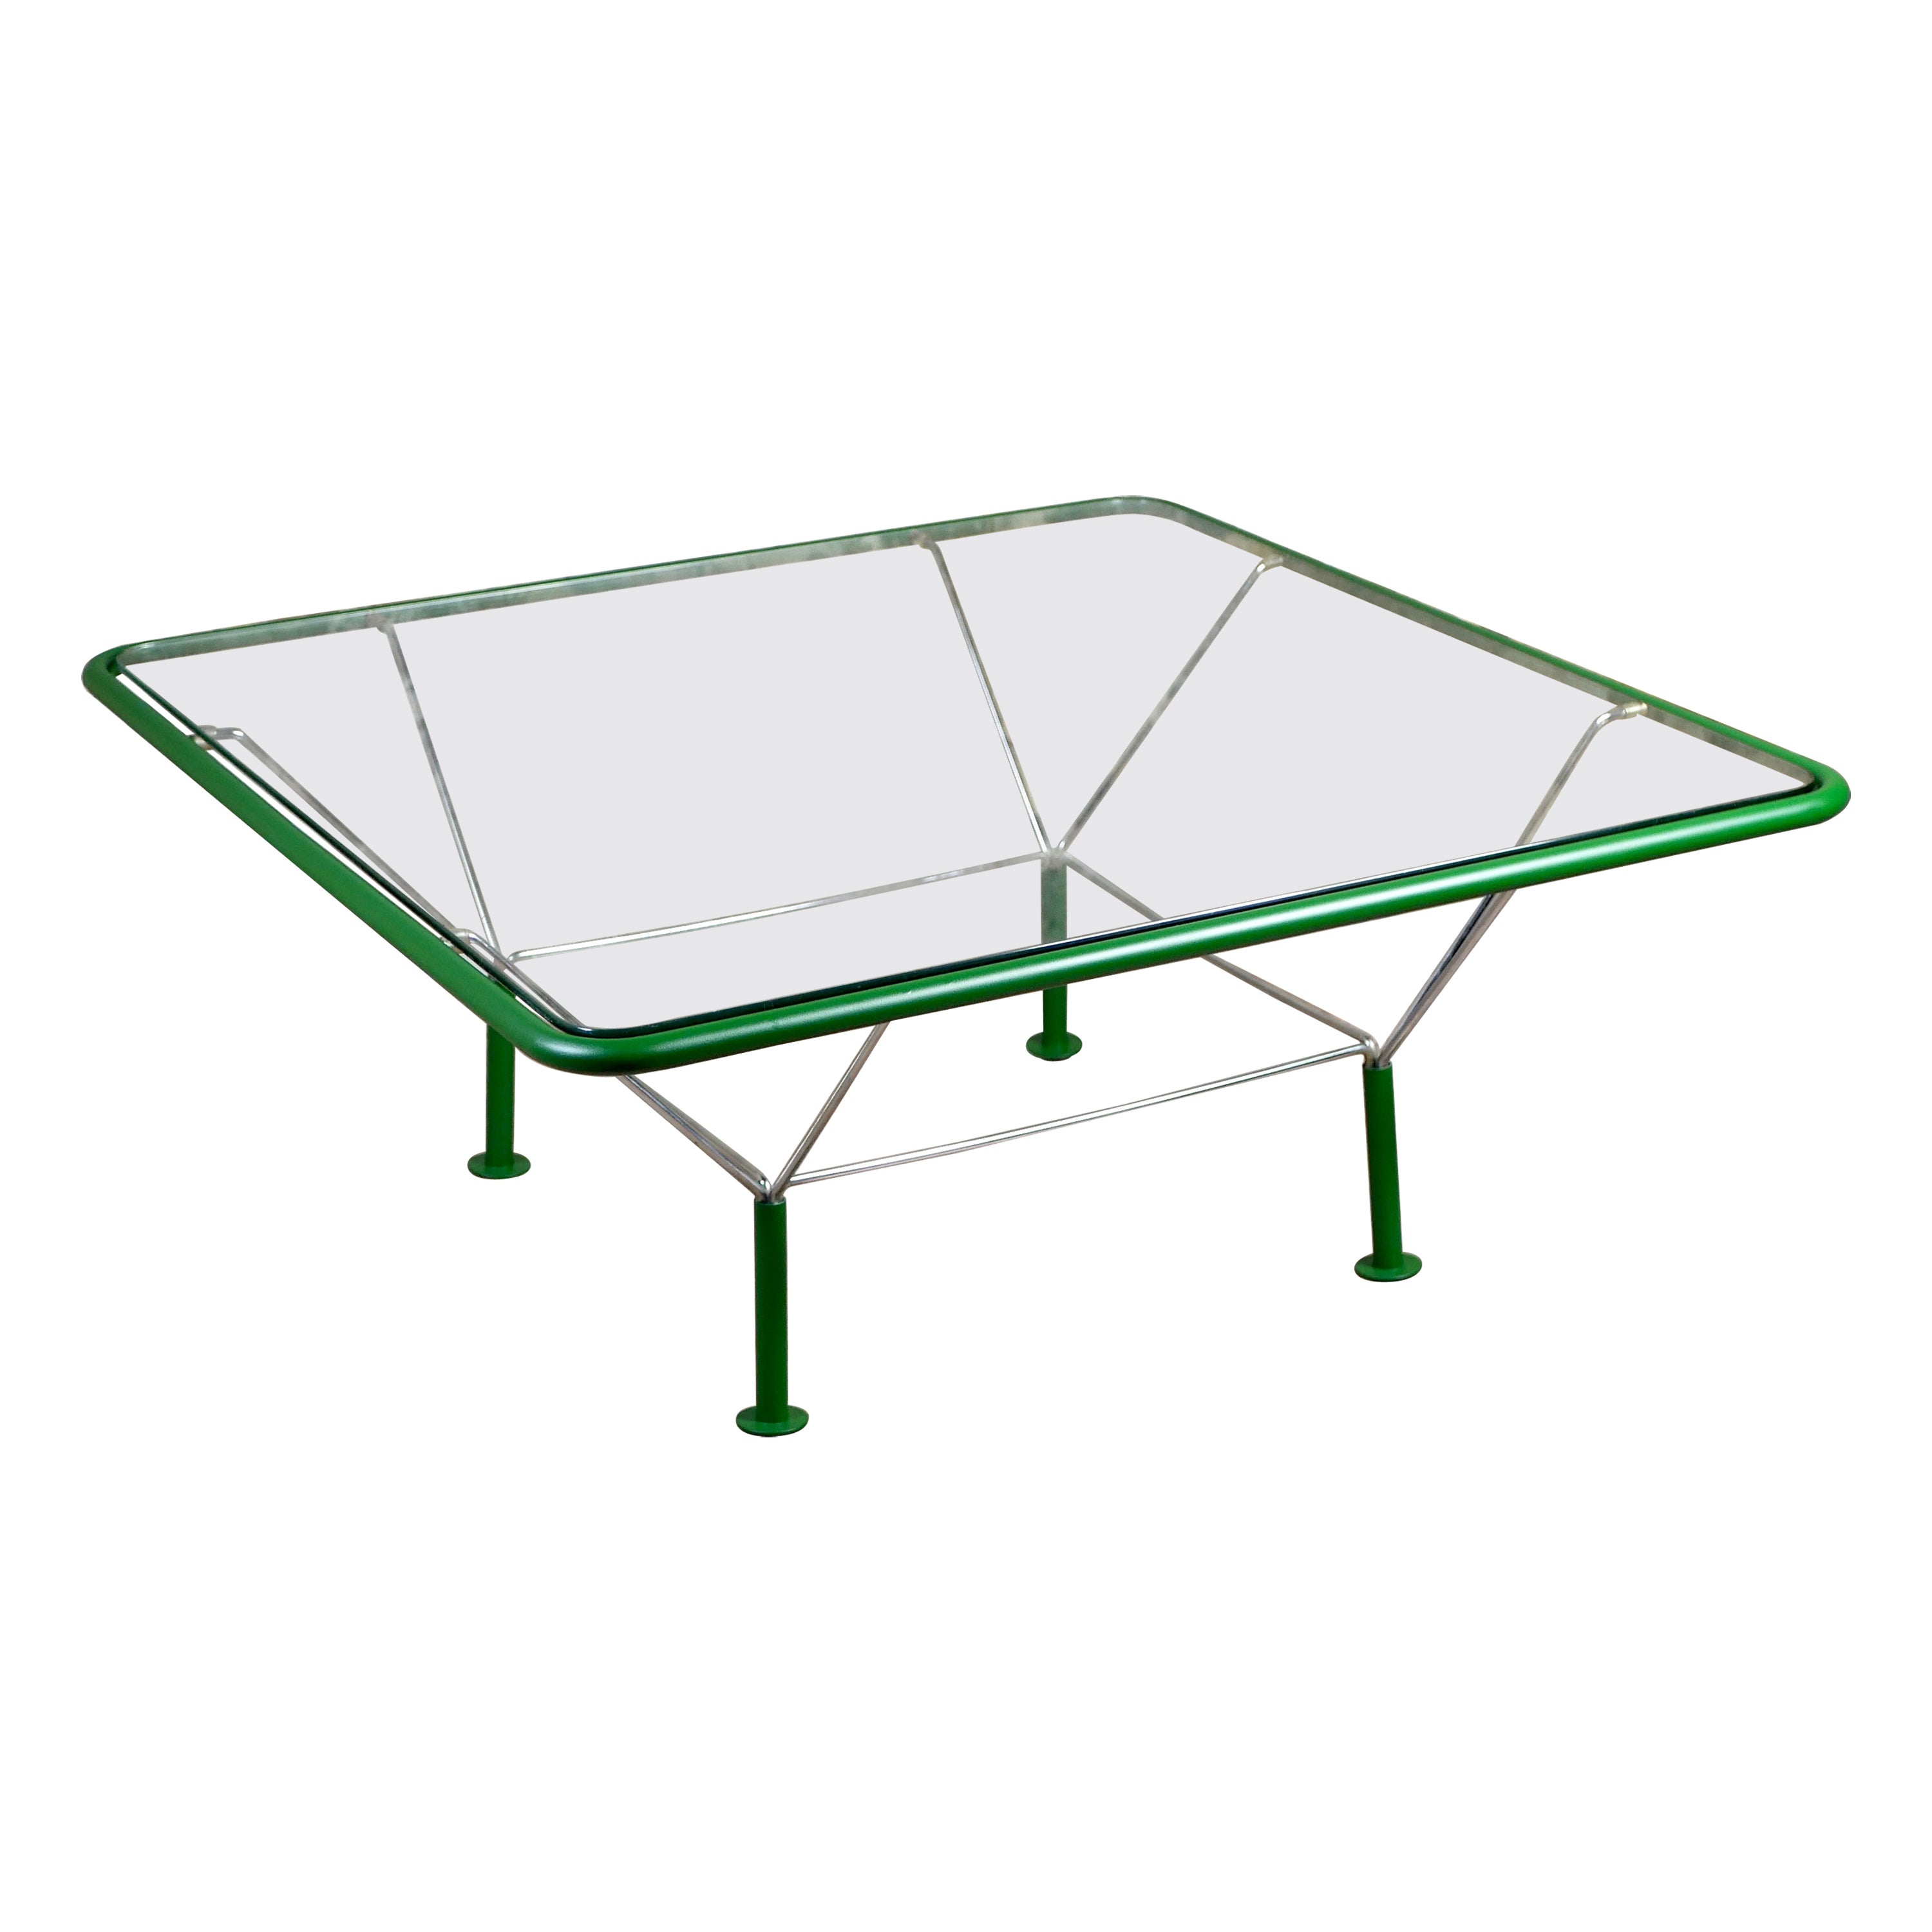 Large green coffee table by Niels Bendtsen, made in Denmark in the 1970s For Sale